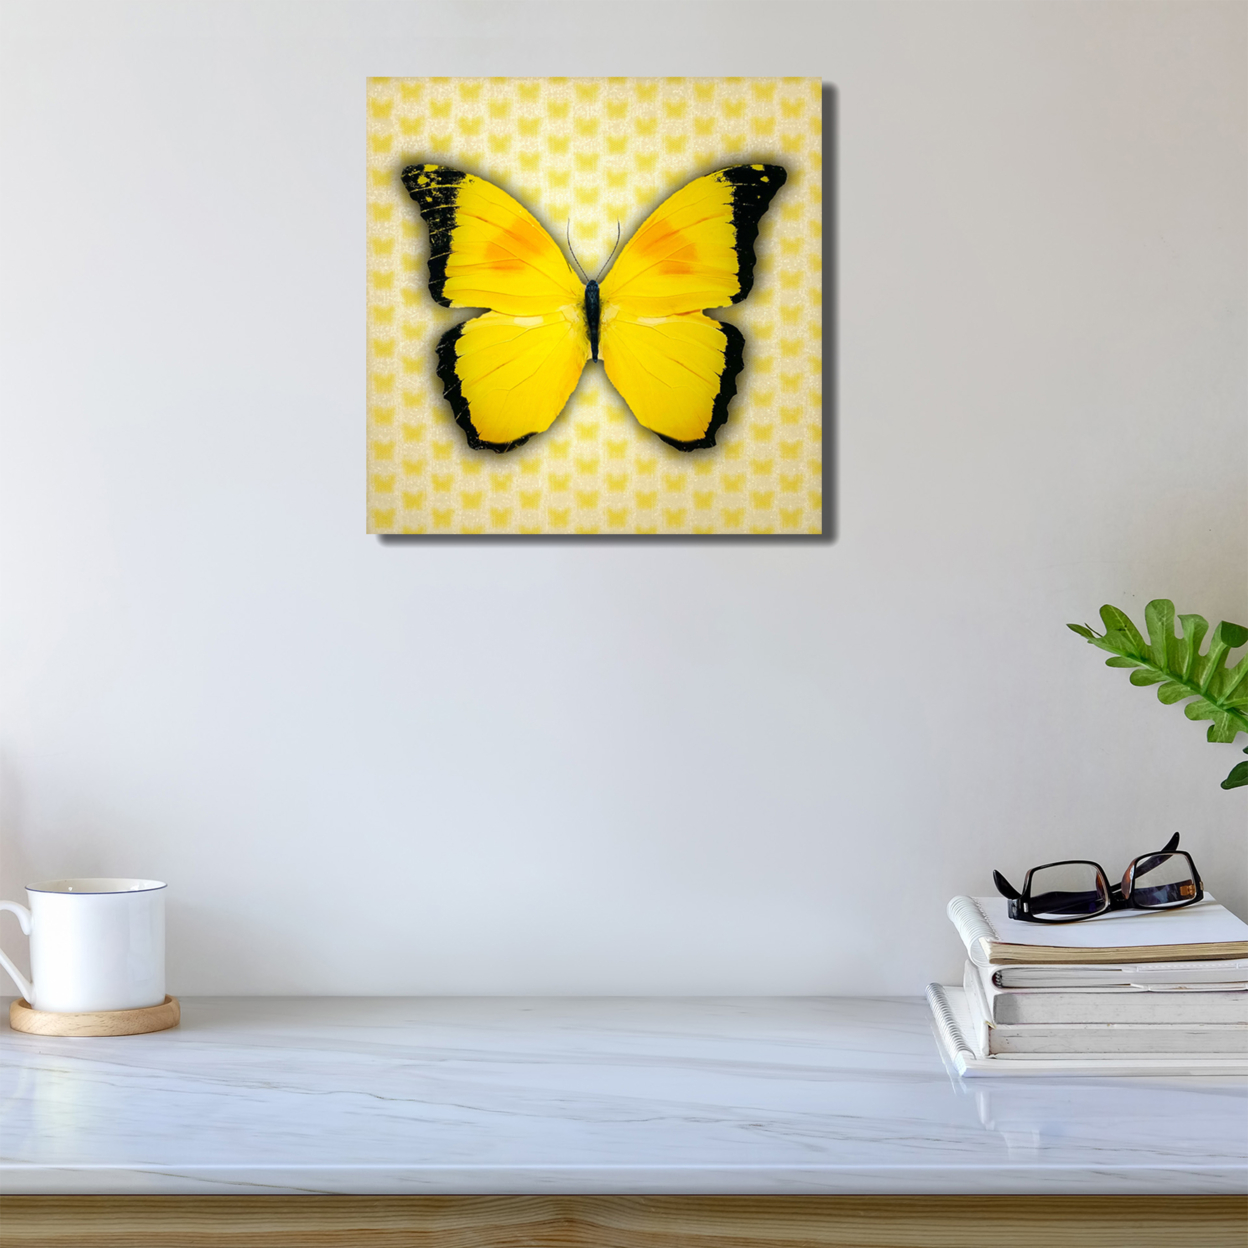 Matashi Multi-Dimensional Custom Made 5D Yellow Butterfly Wall Art Print On Strong Polycarbonate Panel With Vibrant Colors (16x16 Inch)